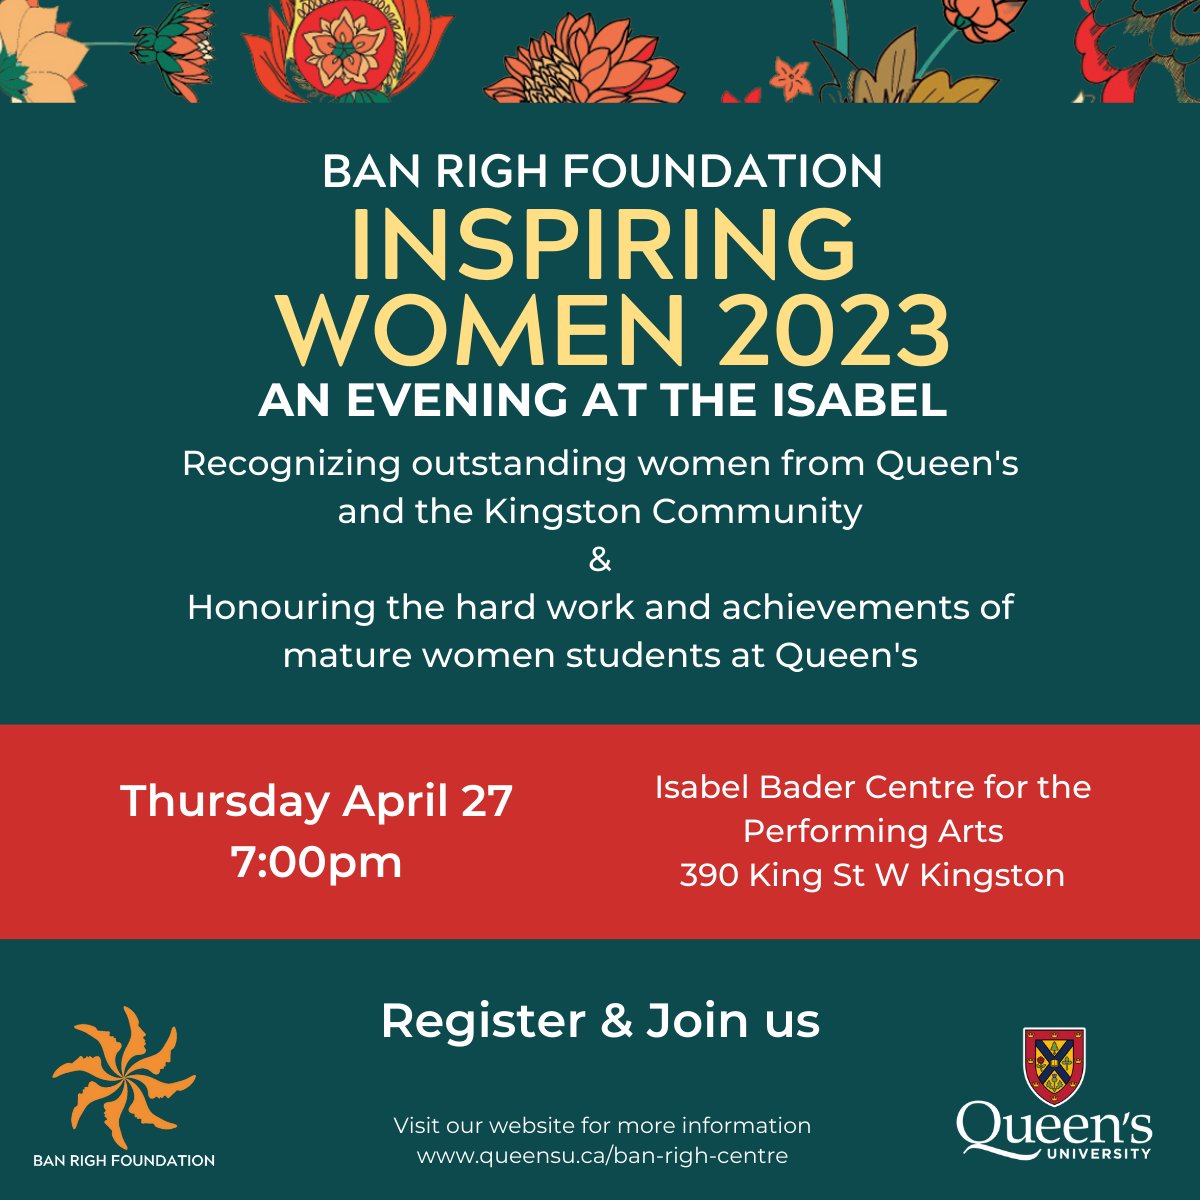 Didn't register? Don't worry...just come, and feel free to bring a friend! #ygk #queensu.ca